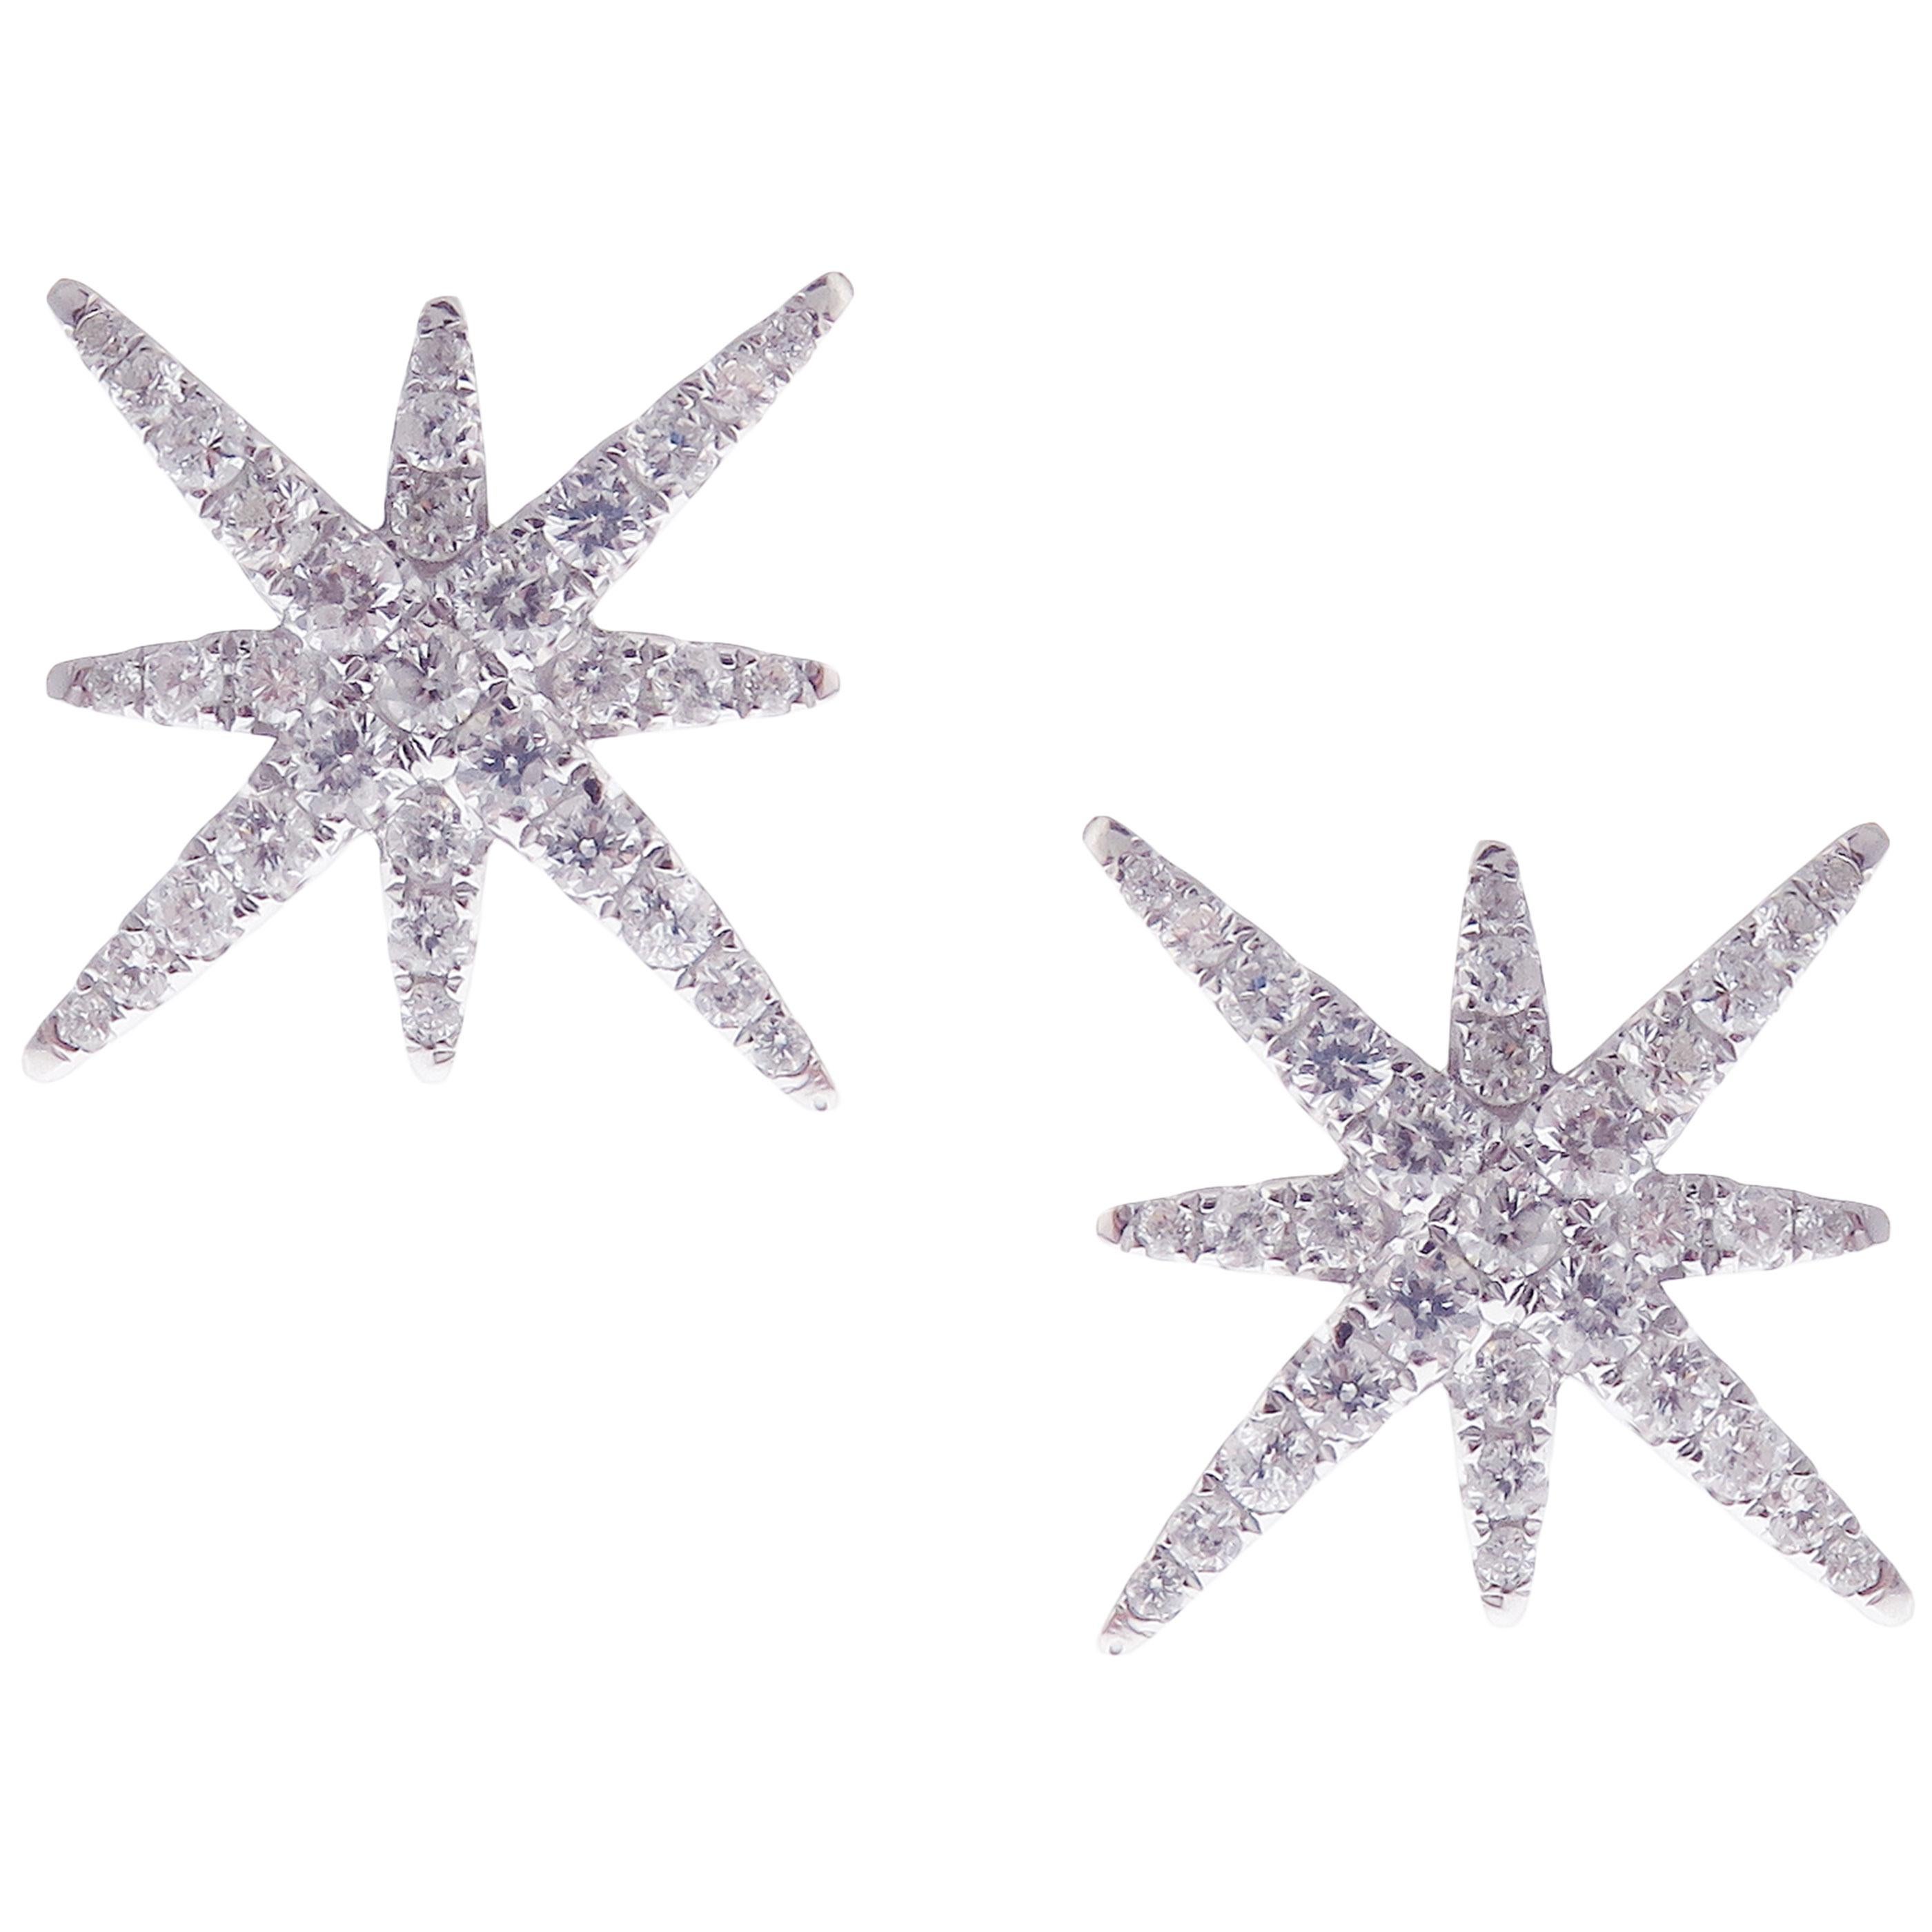 This diamond pave starburst stud earring is crafted in 18-karat white gold, featuring 66 round white diamonds totaling of 0.60 carats. 
Approximate total weight 2.50 grams.
These earrings come with push back post backings.
SI-G Quality natural white